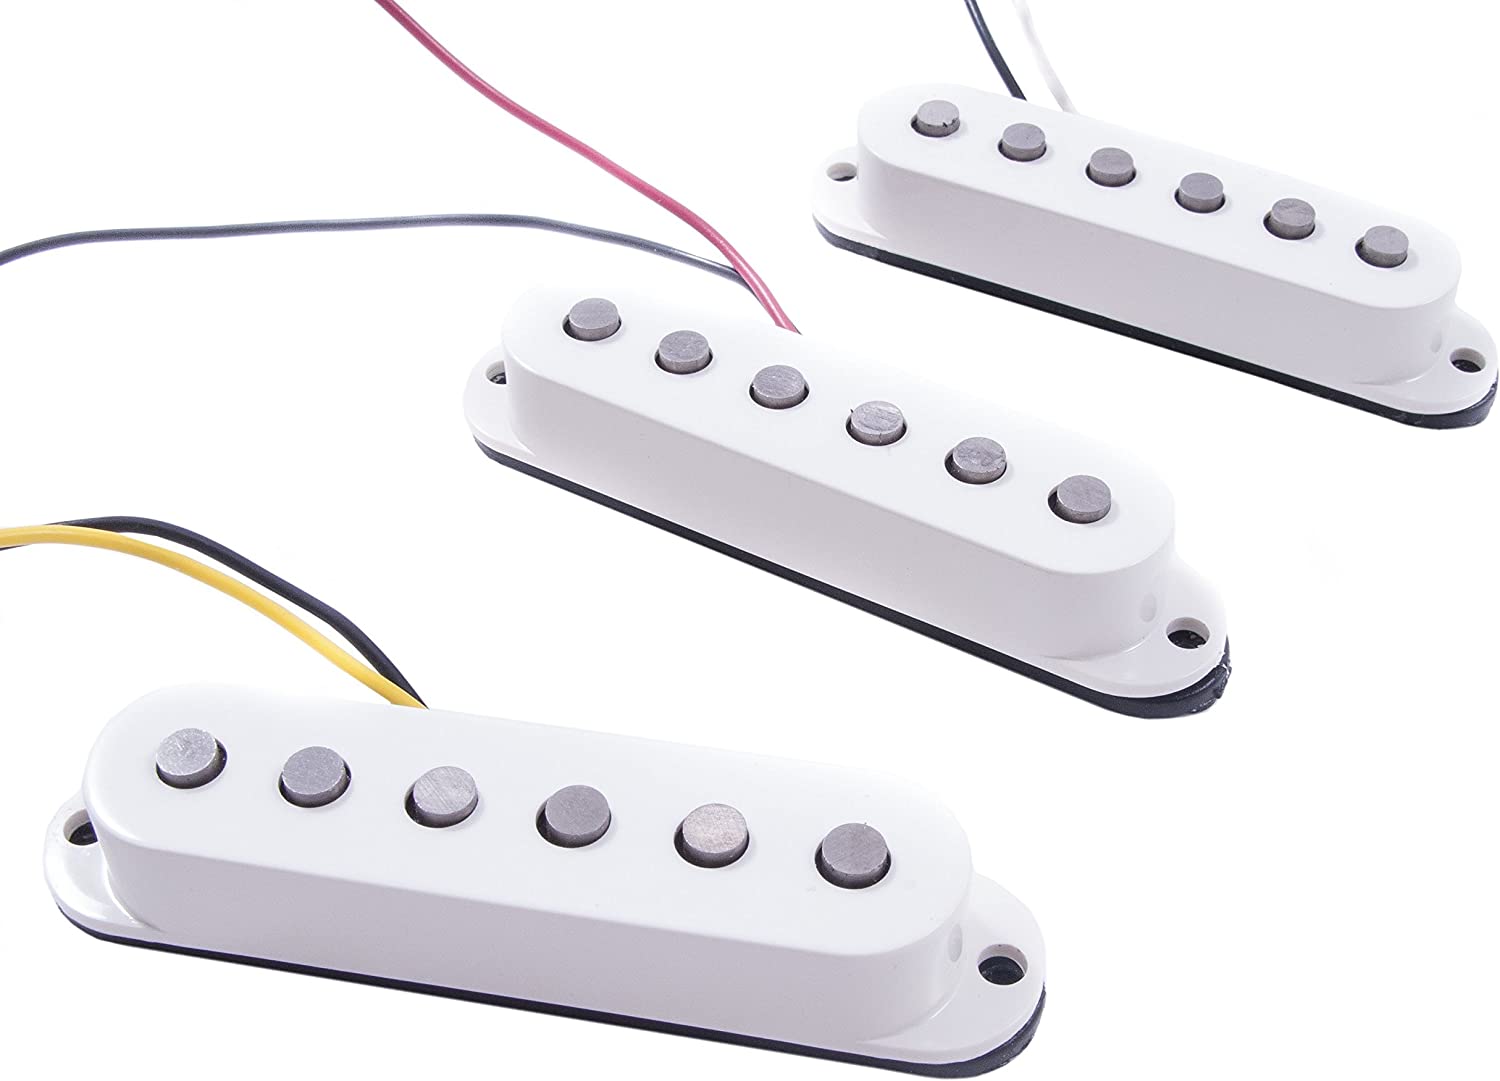 Fender Deluxe Drive Stratocaster Pickup on a white background